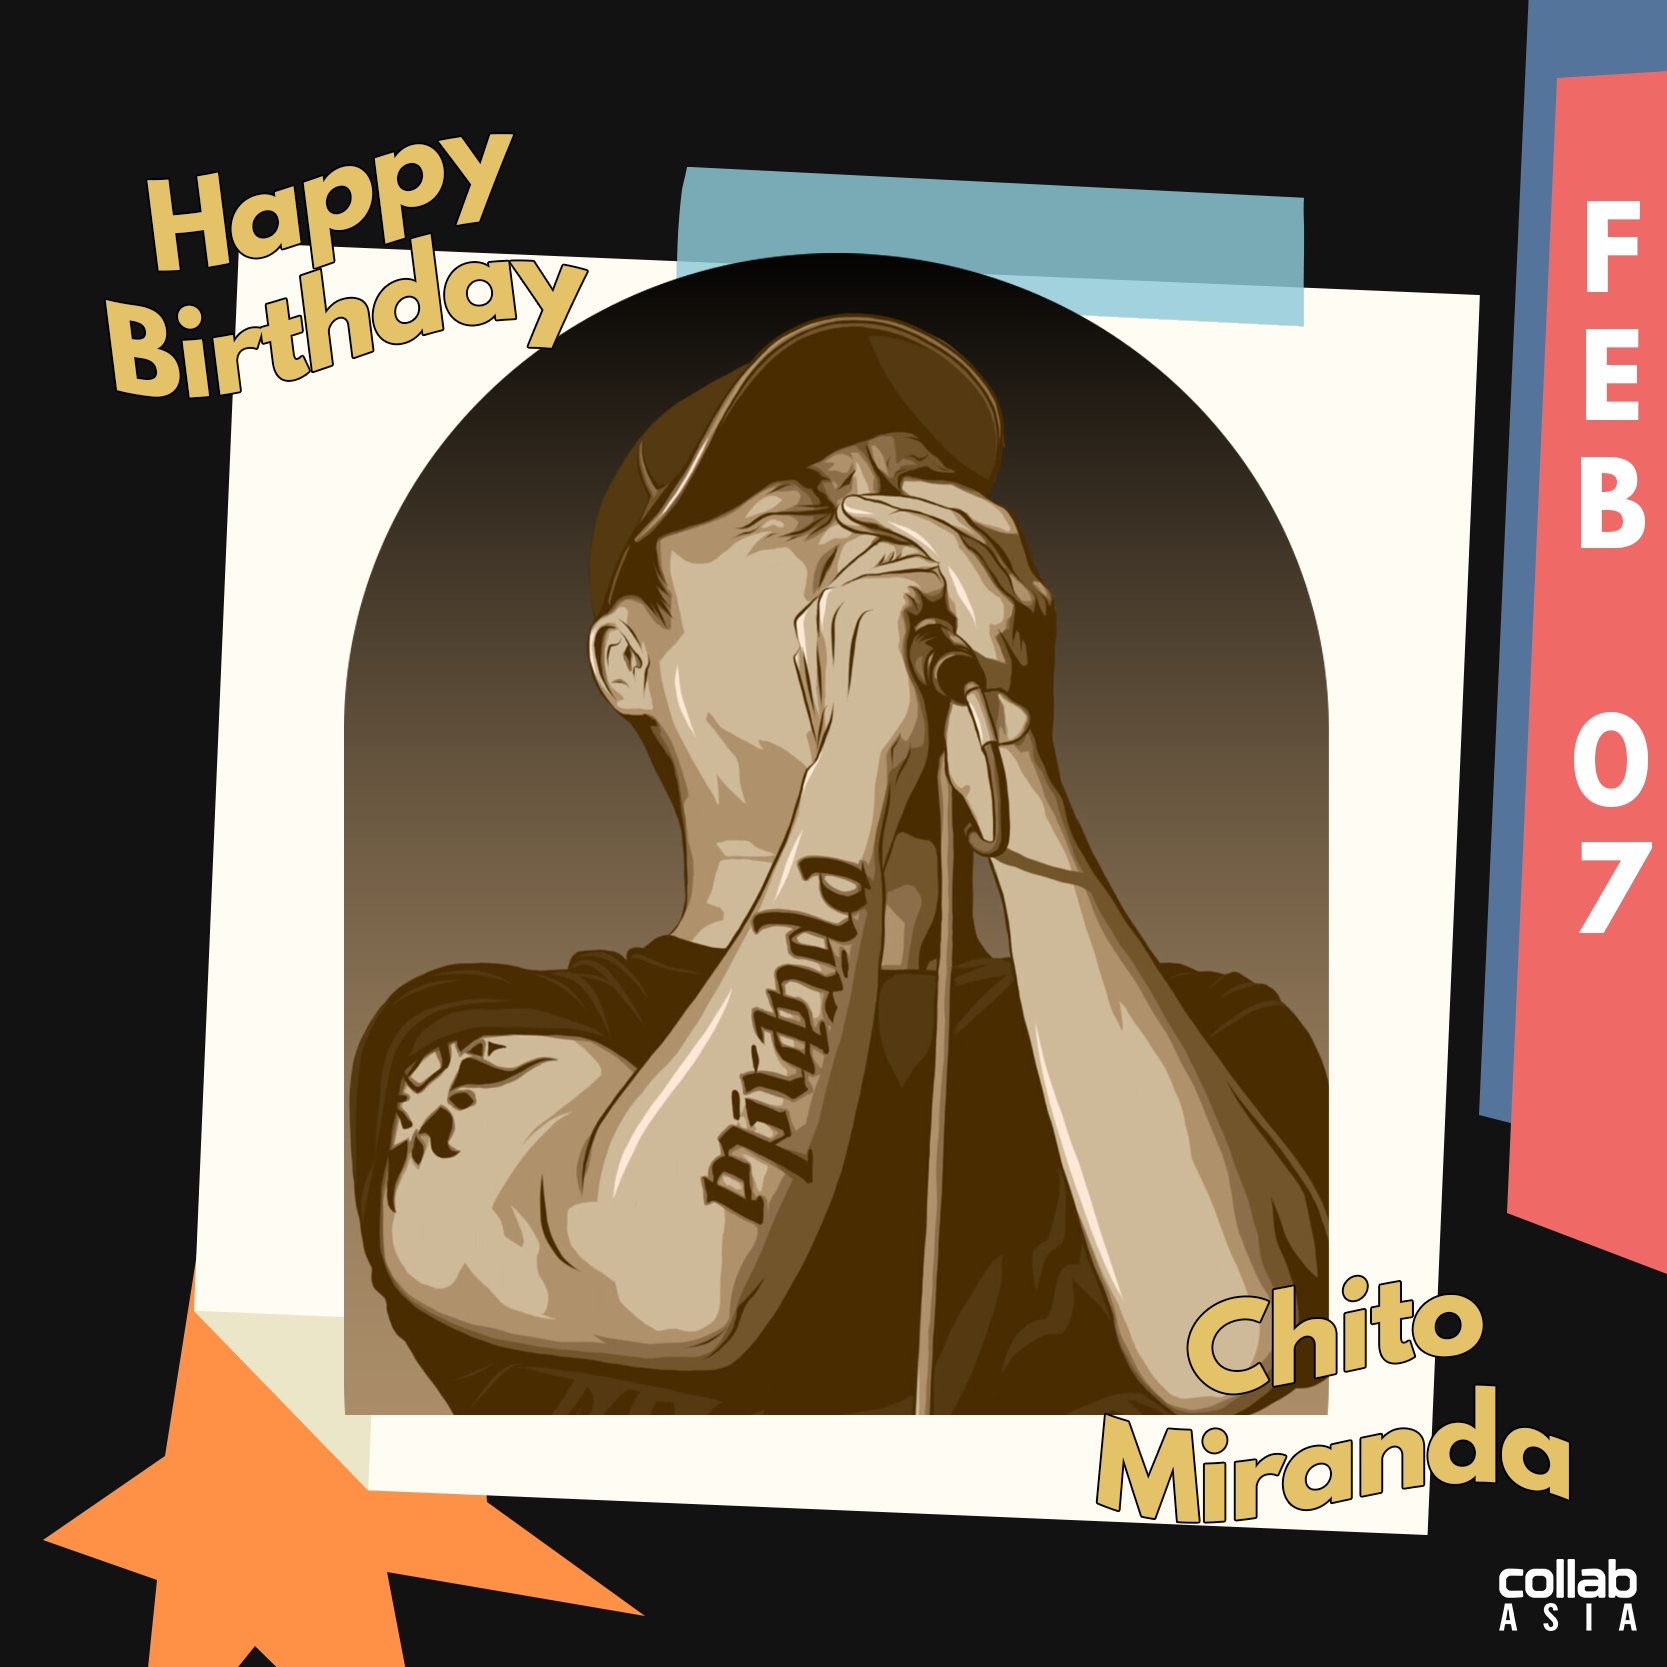 On this special day, We raise a toast to you and your life. Happy birthday, Chito Miranda! 